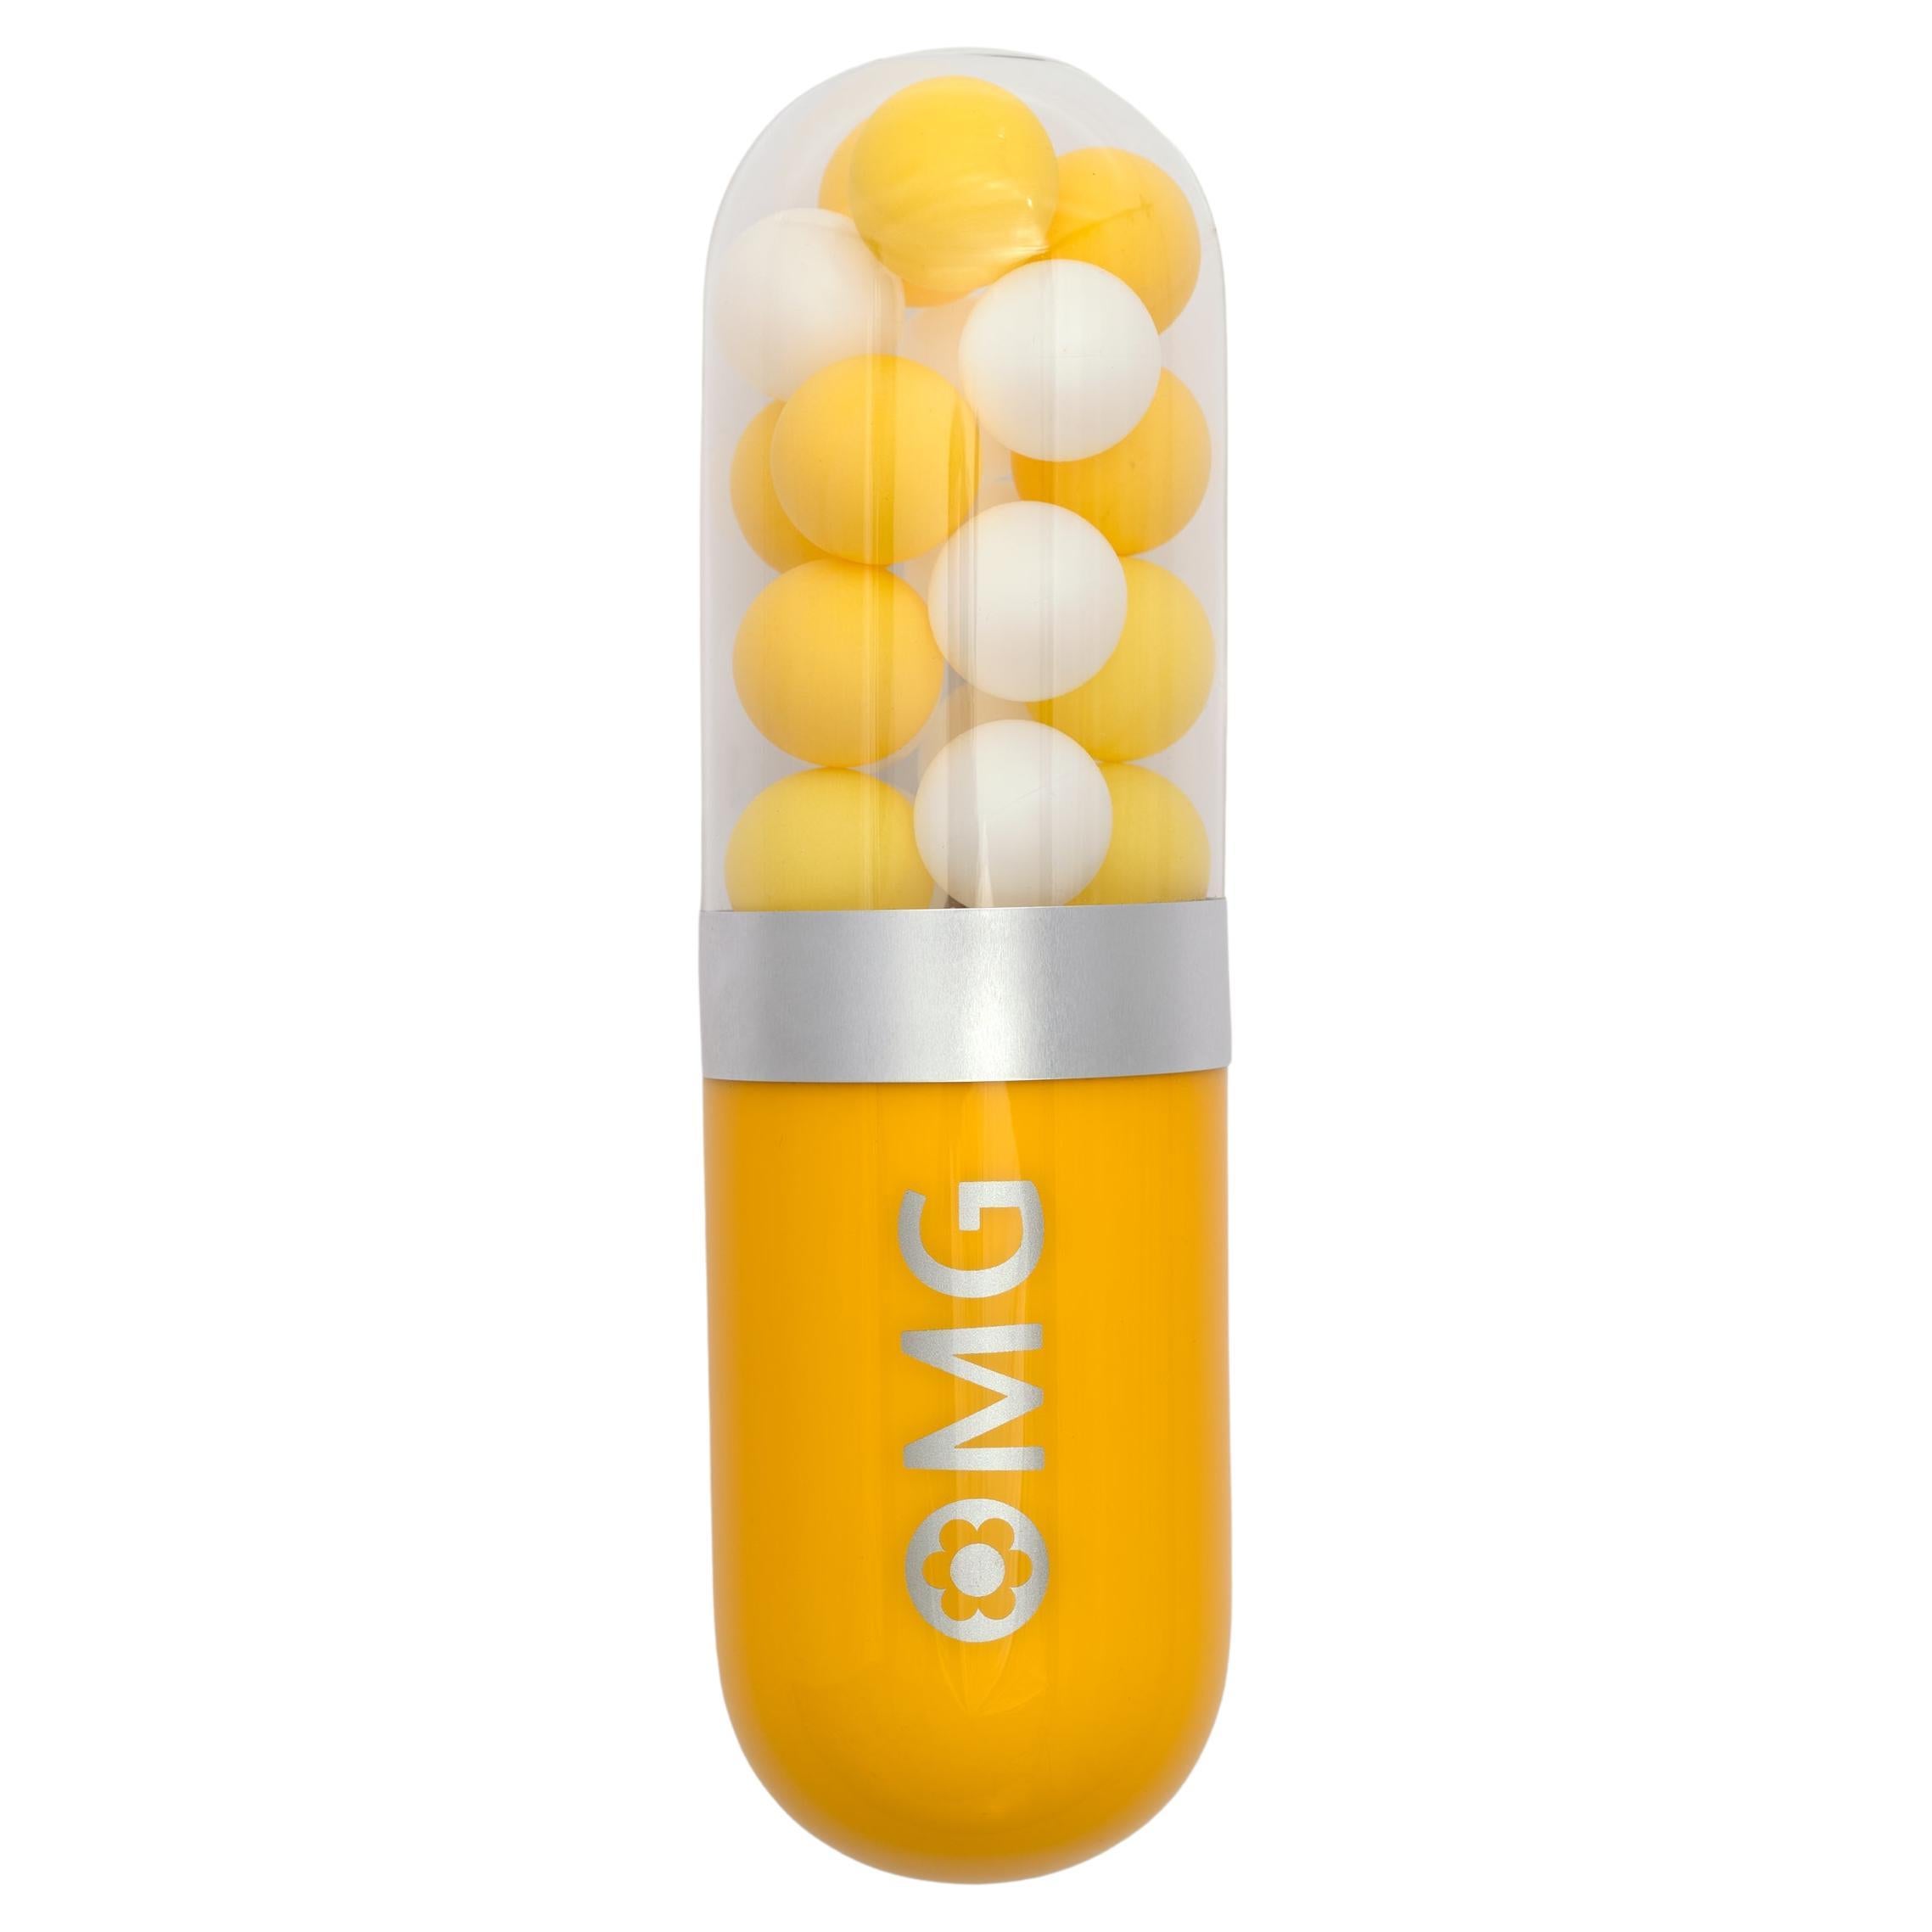 OMG (Oh My God) - Yellow glass pill wall sculpture For Sale